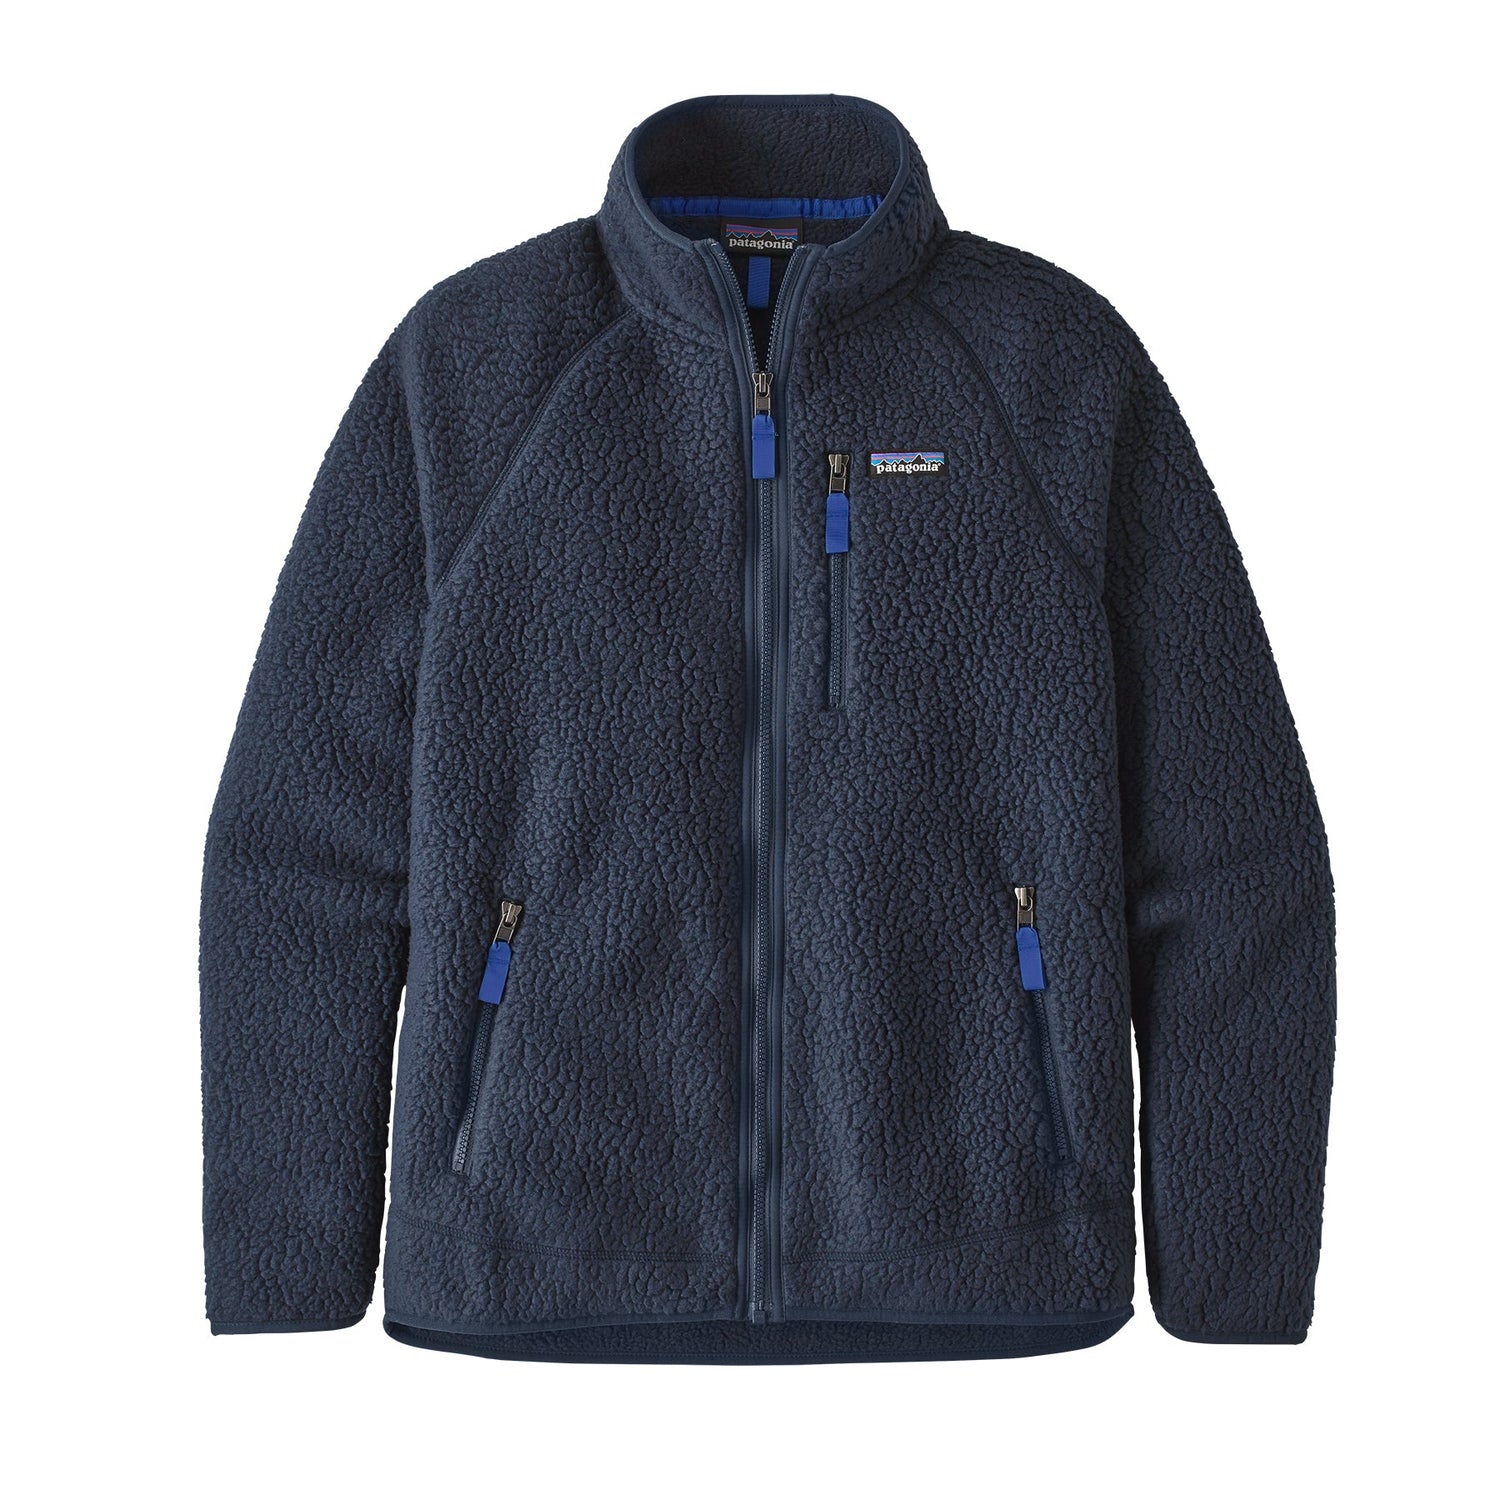 Patagonia M's Retro Pile Jacket - 100 % Recycled Polyester New Navy Jacket